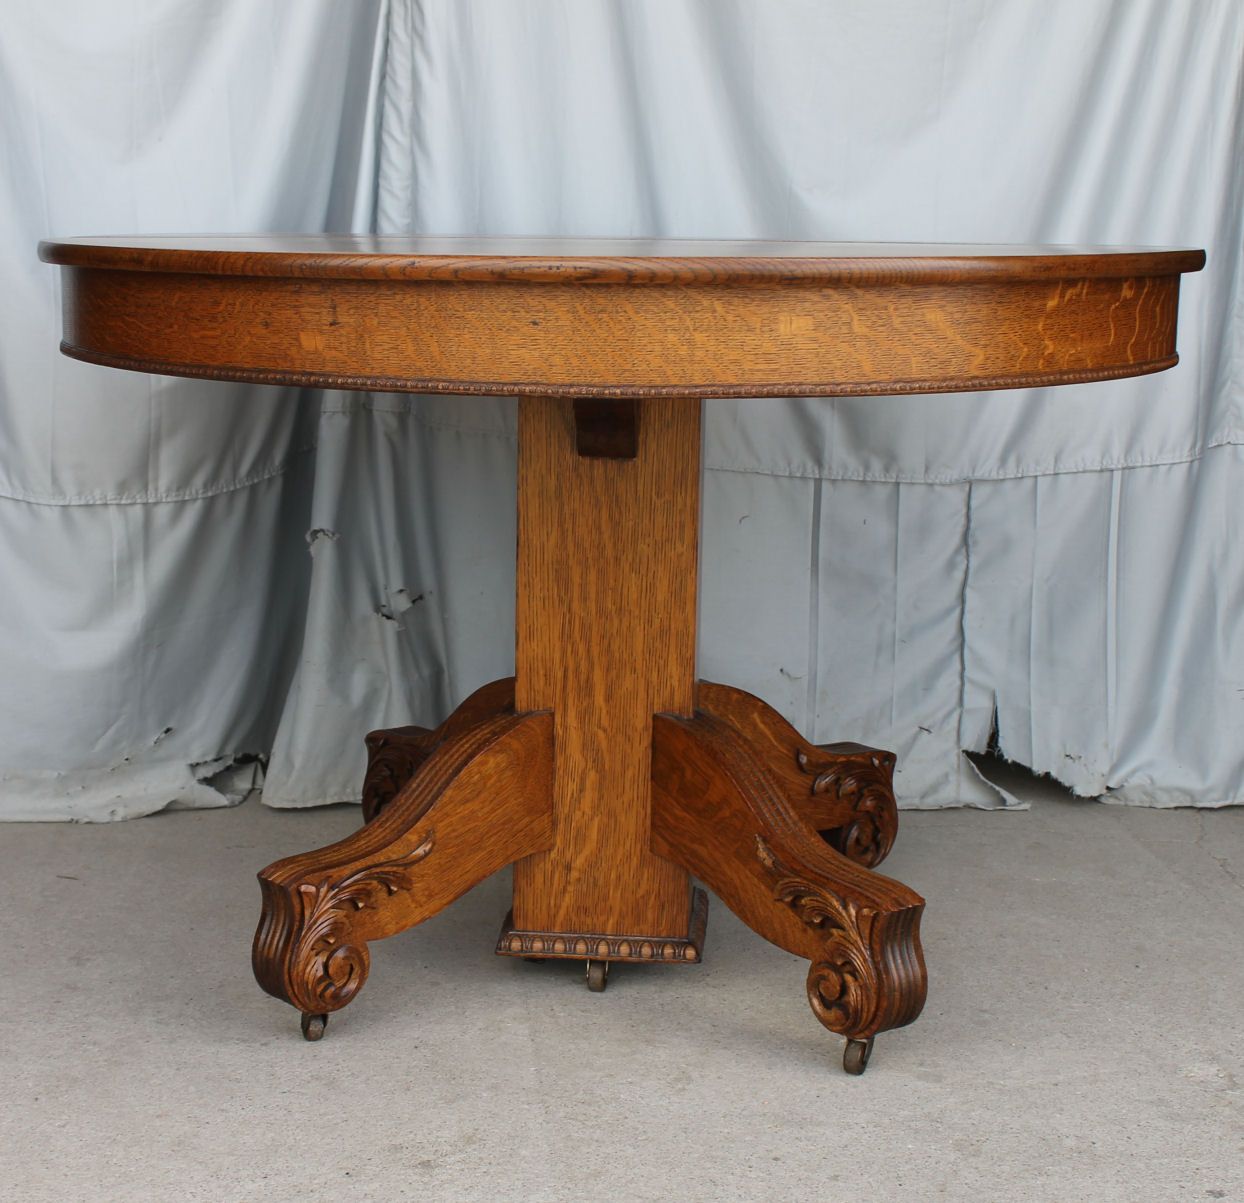 Bargain John'S Antiques | Antique Round Oak Dining Table For Best And Newest Reclaimed Teak And Cast Iron Round Dining Tables (View 7 of 15)